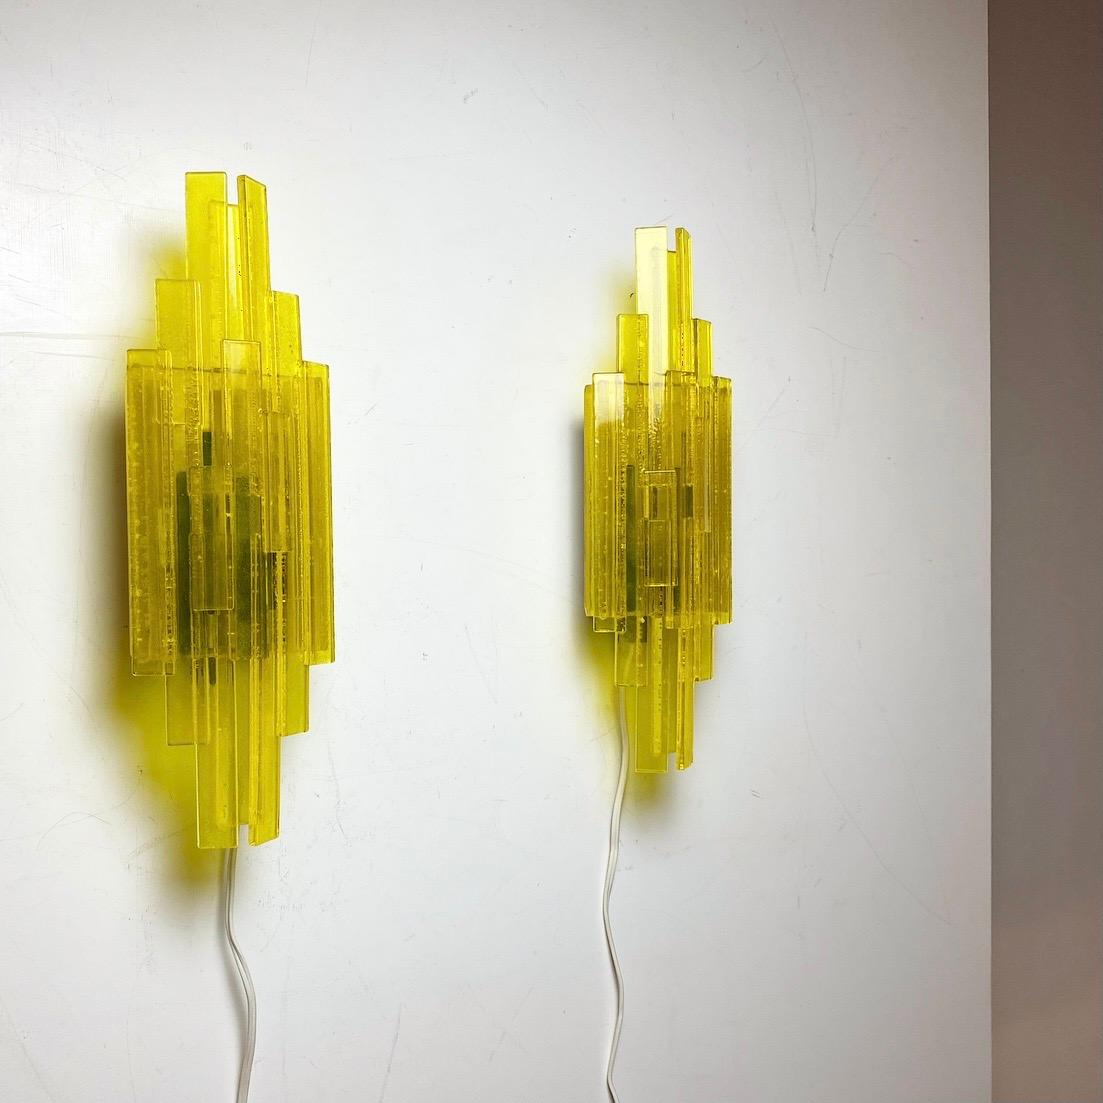 Beautiful iconic and rare set of wall lights by Claus Bolby, Denmark 1970s. 

Finding an original set of Claus Bolby in yellow color and never restored before is quite rare. 

These lights are made of yellow transparent plastic sticks. Gives a